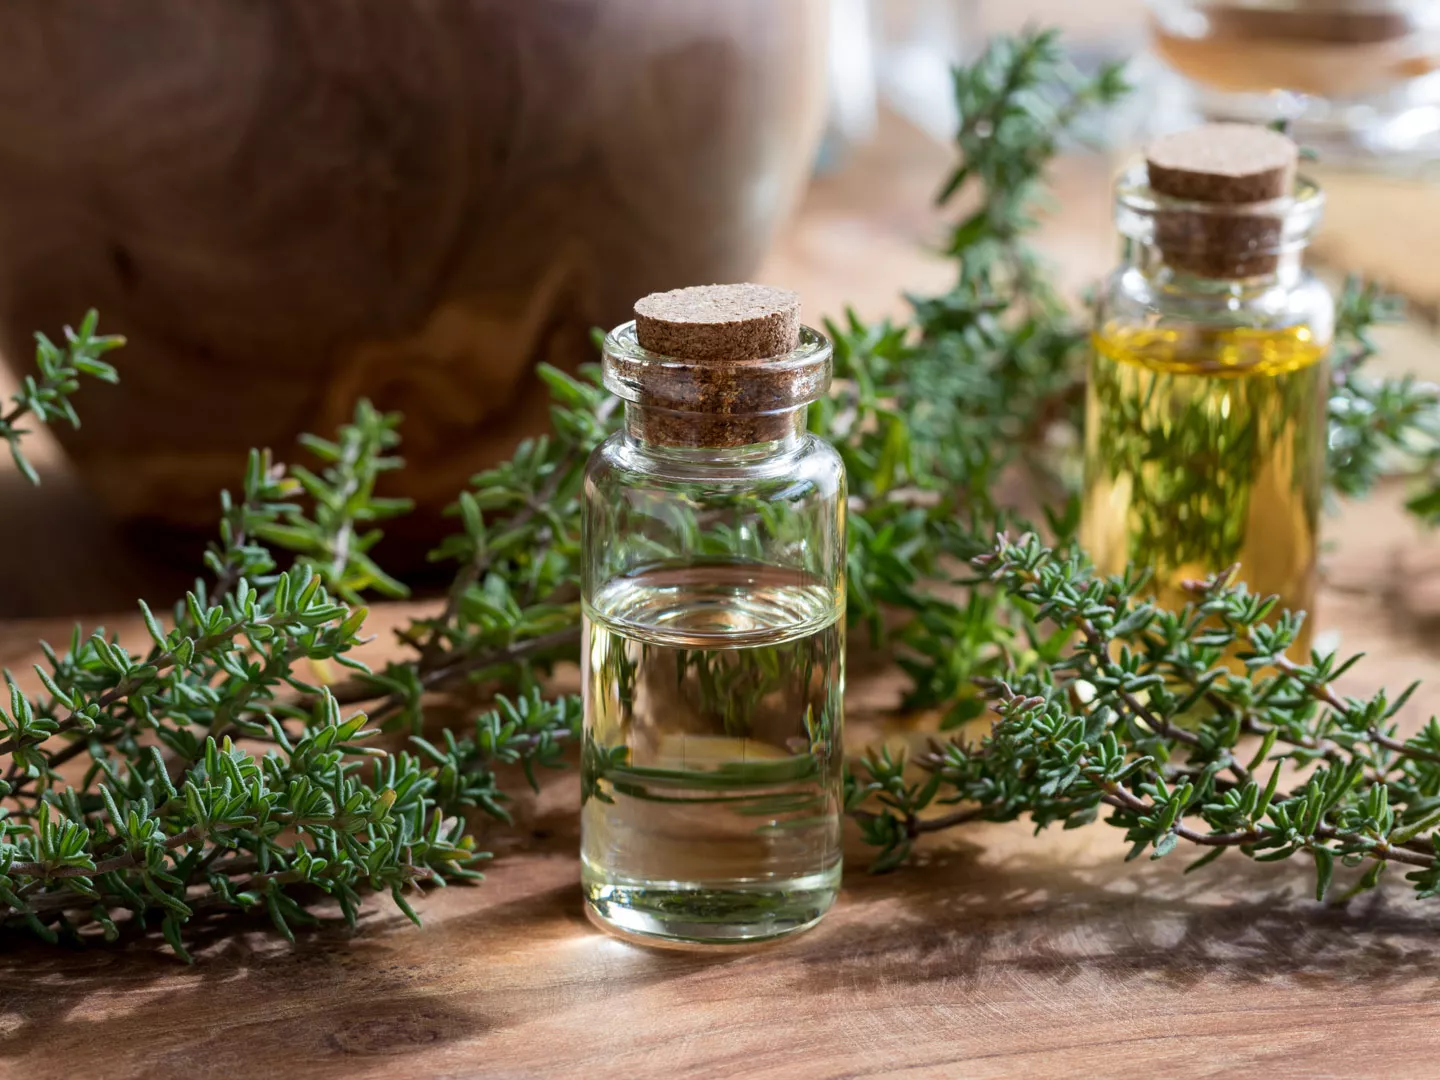 thyme-oil-guide-to-essential-oils-andrew-weil-m-d-857777734.jpg